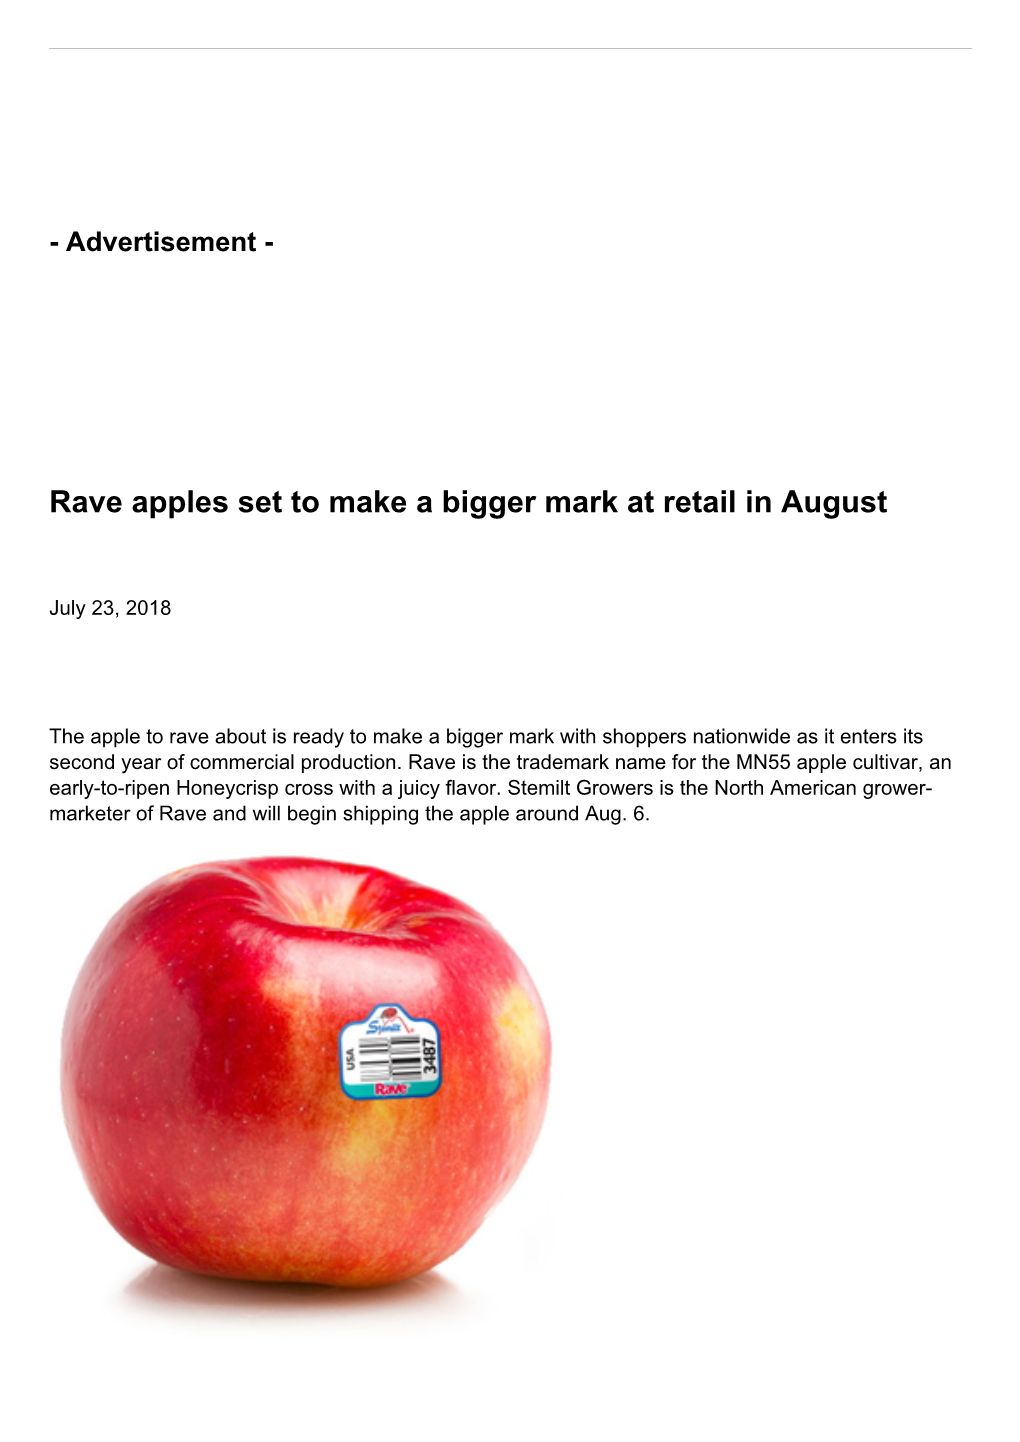 Rave Apples Set to Make a Bigger Mark at Retail in August